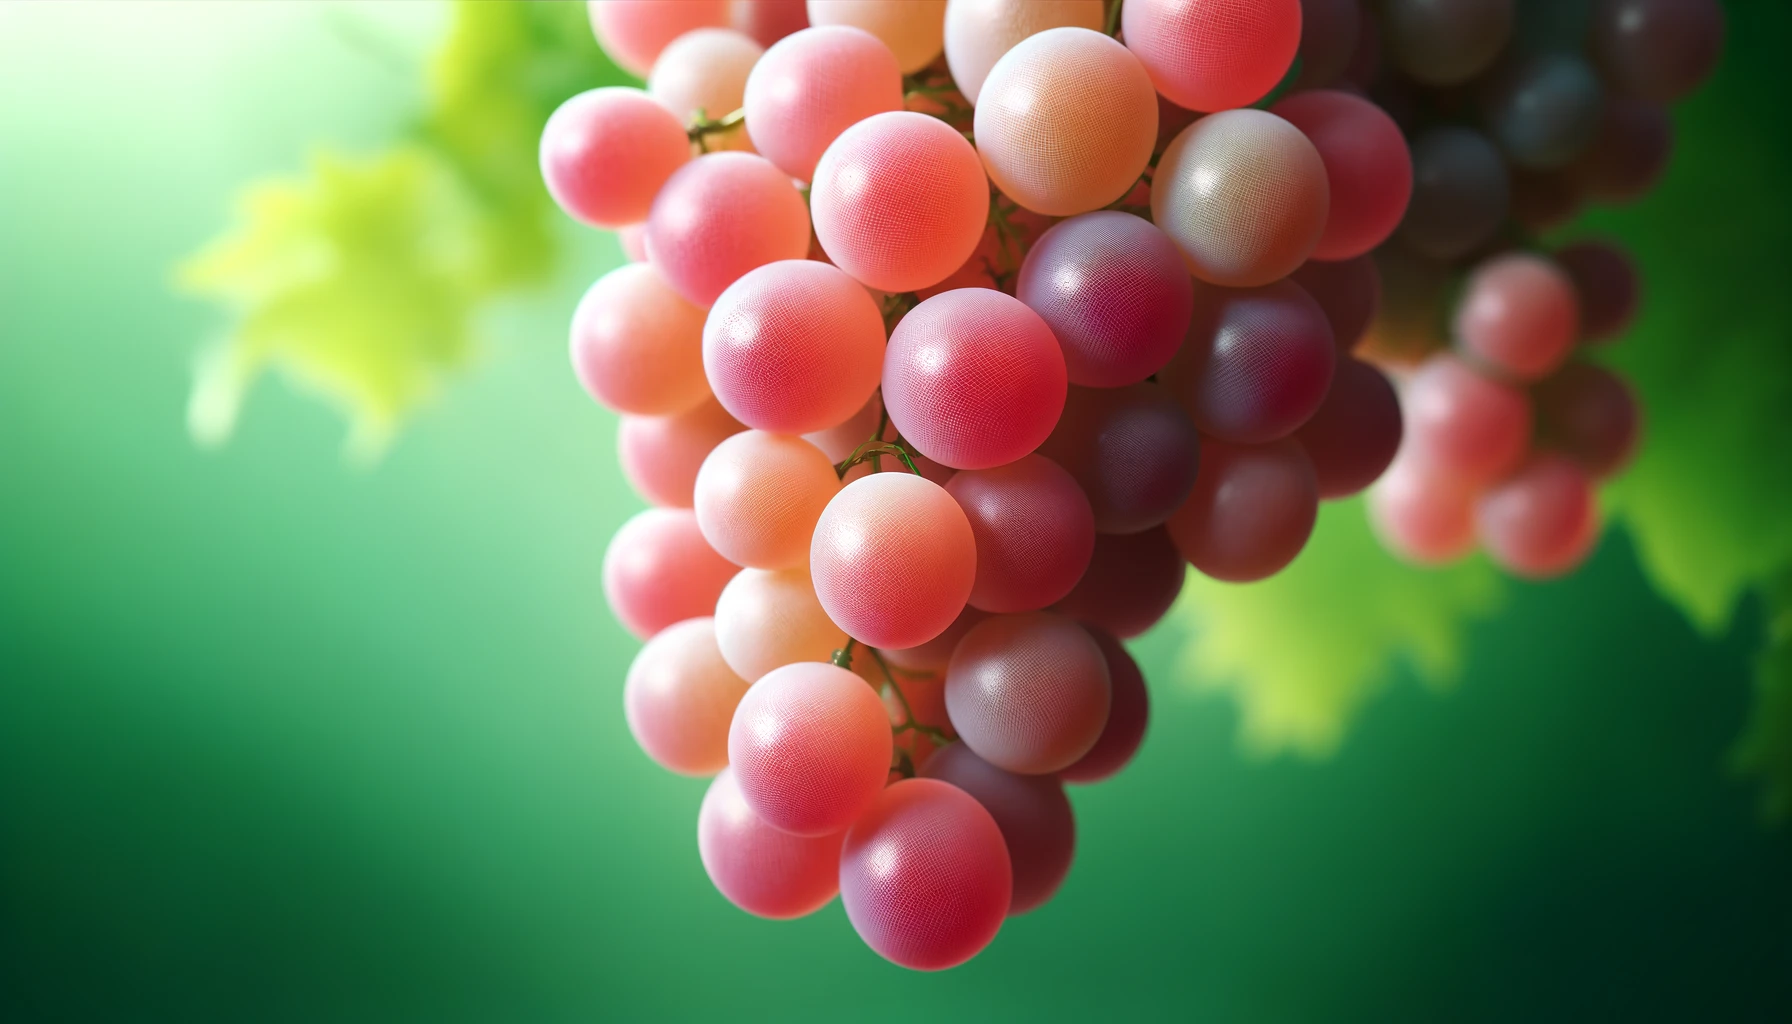 DALL·E 2024-05-23 10.56.28 - Close-up, photorealistic stock image of Cinsault grapes, focusing on a cluster of ripe Cinsault grapes with light red to pink skins. The image should